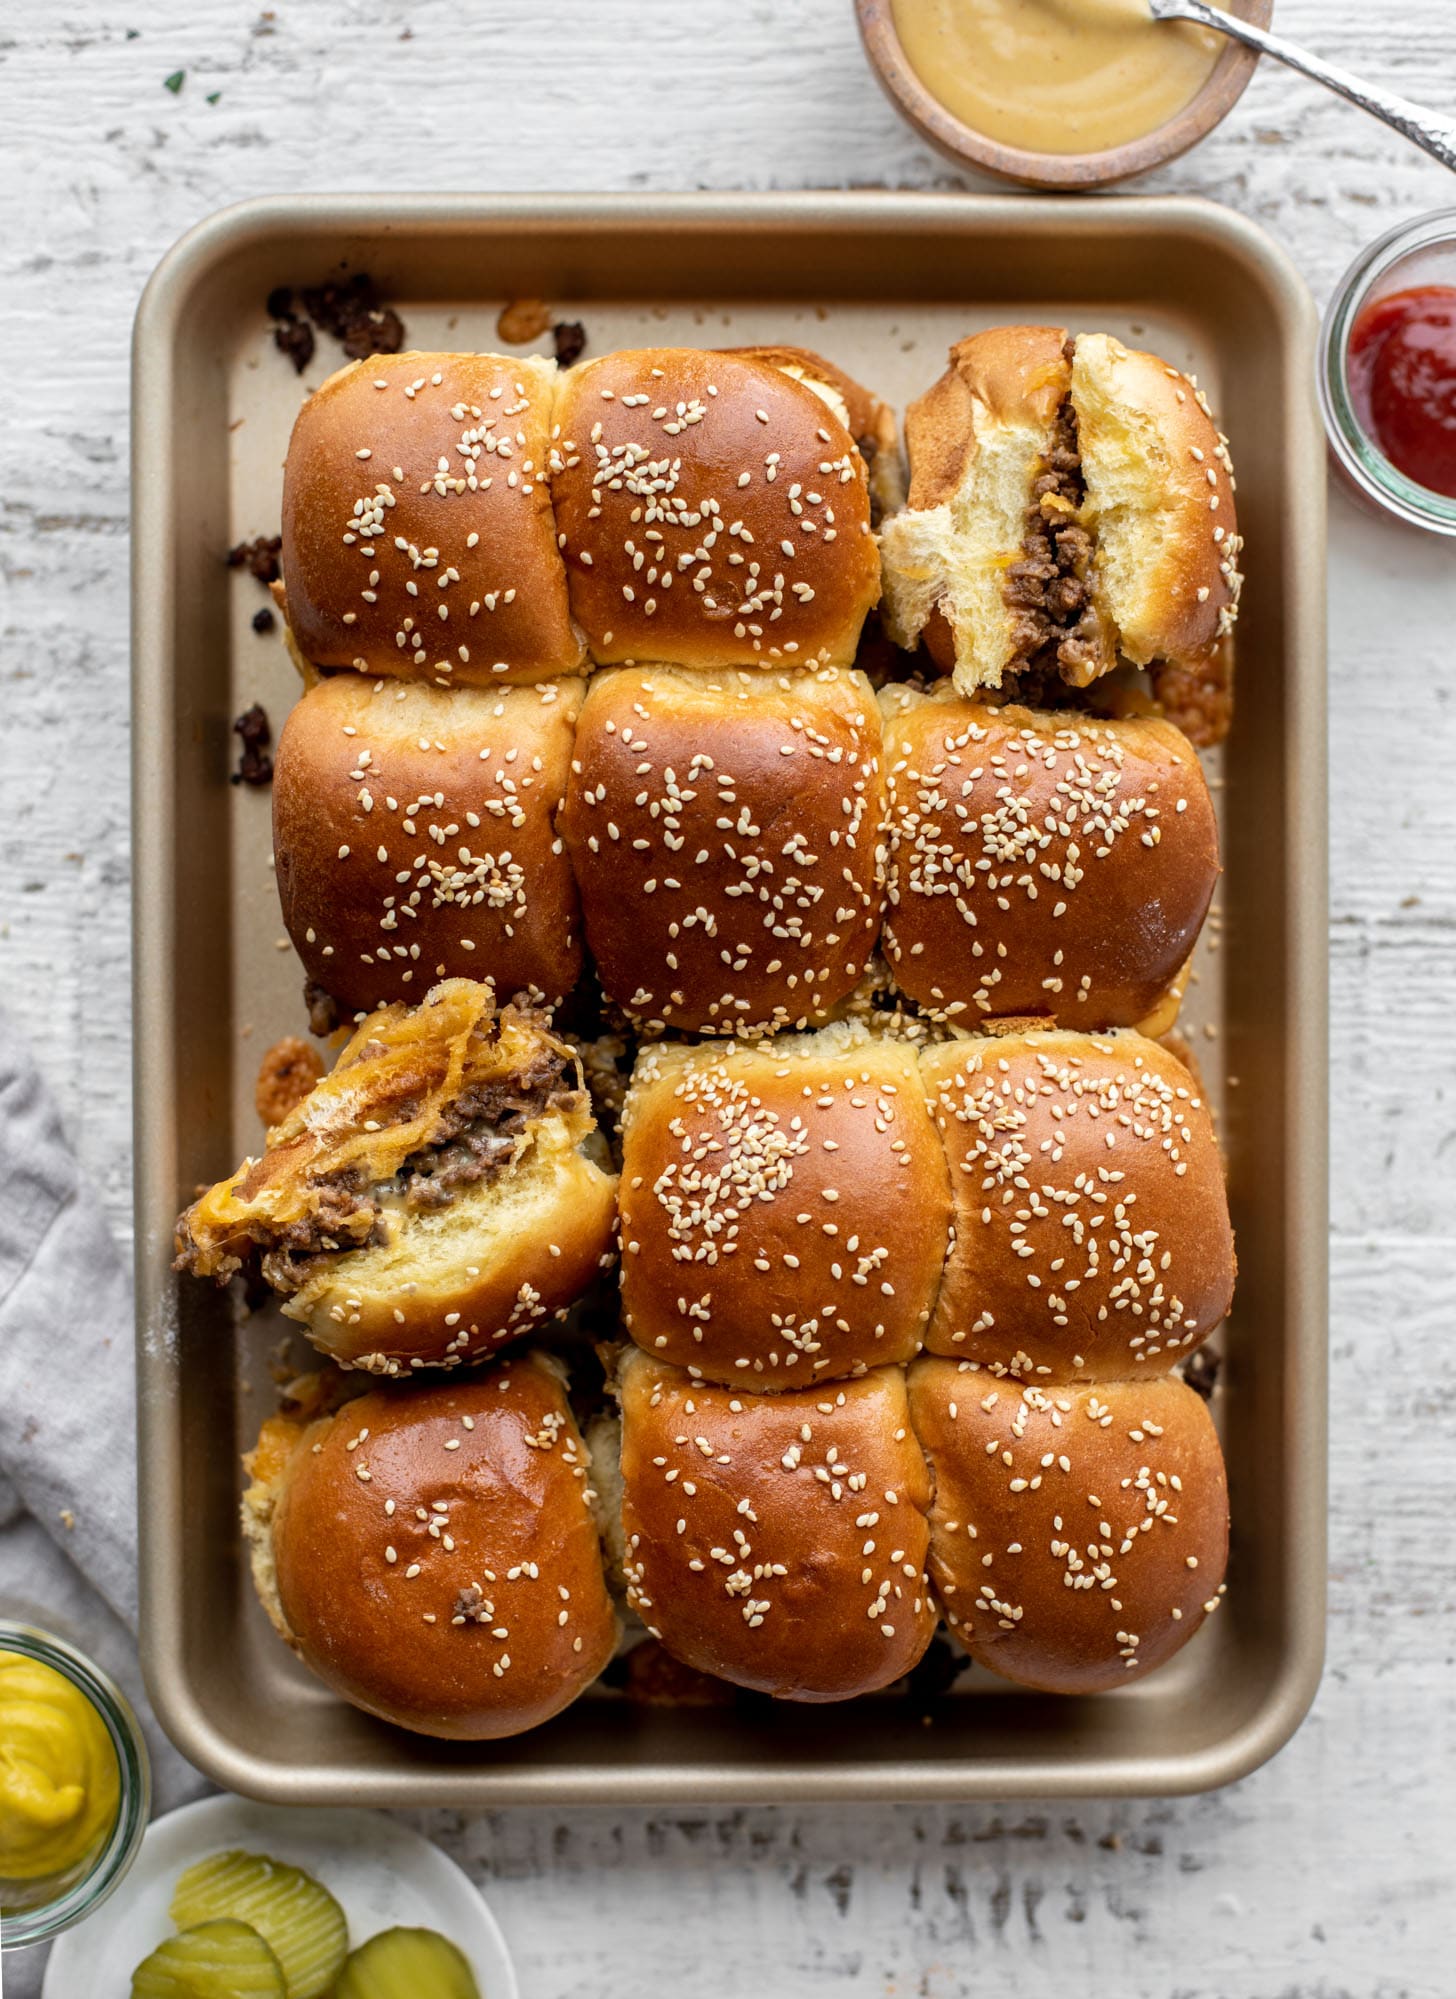 cheeseburger sliders with house sauce